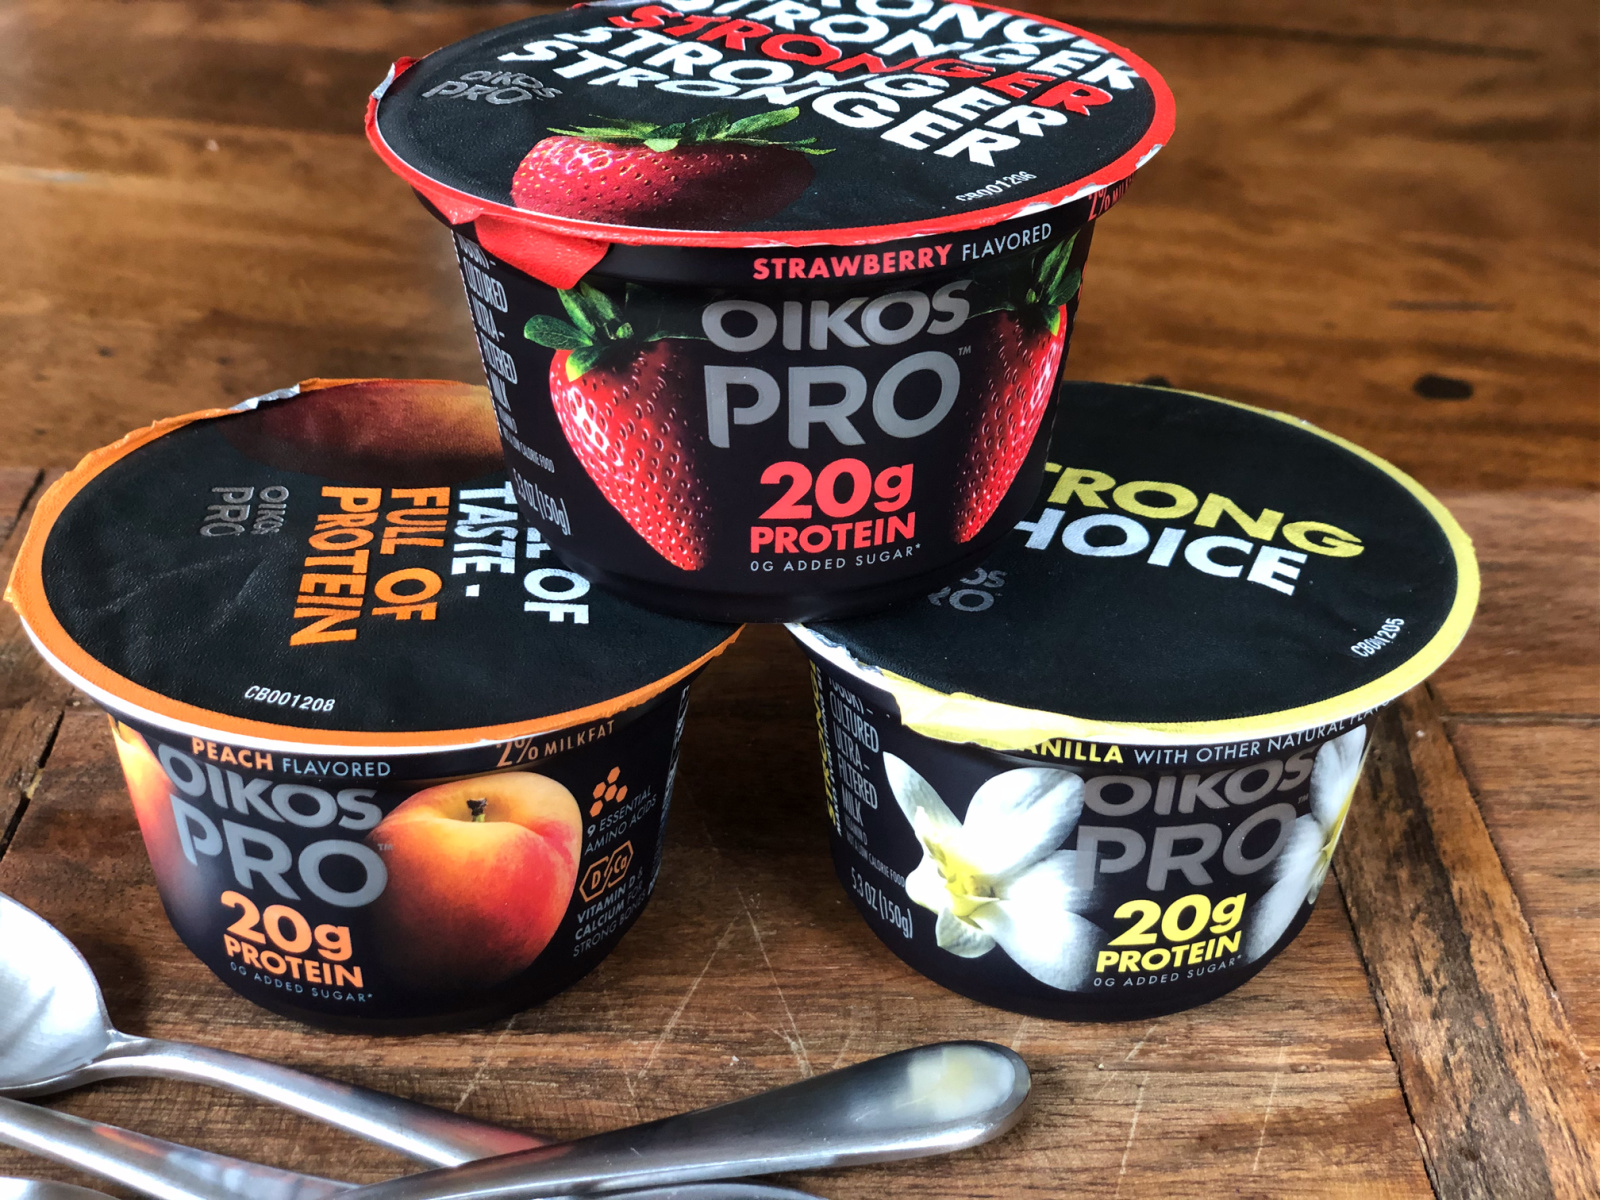 Dannon Oikos Pro Let’s You Enjoy Great Taste And 20 Grams Of Protein